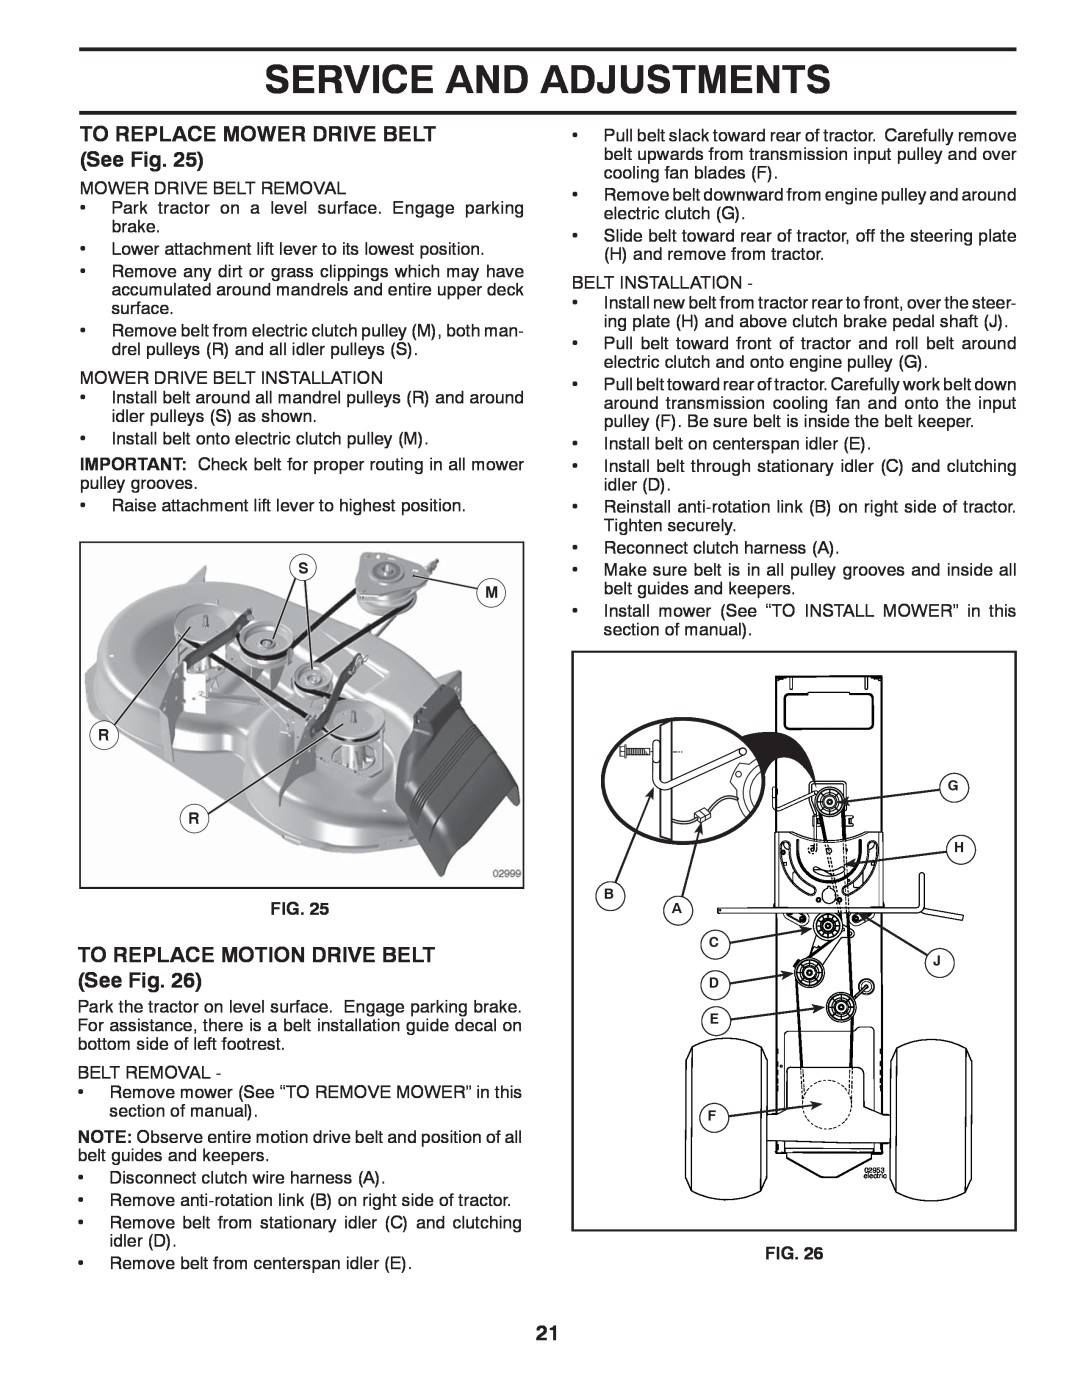 Husqvarna 96043005200 TO REPLACE MOWER DRIVE BELT See Fig, TO REPLACE MOTION DRIVE BELT See Fig, Service And Adjustments 